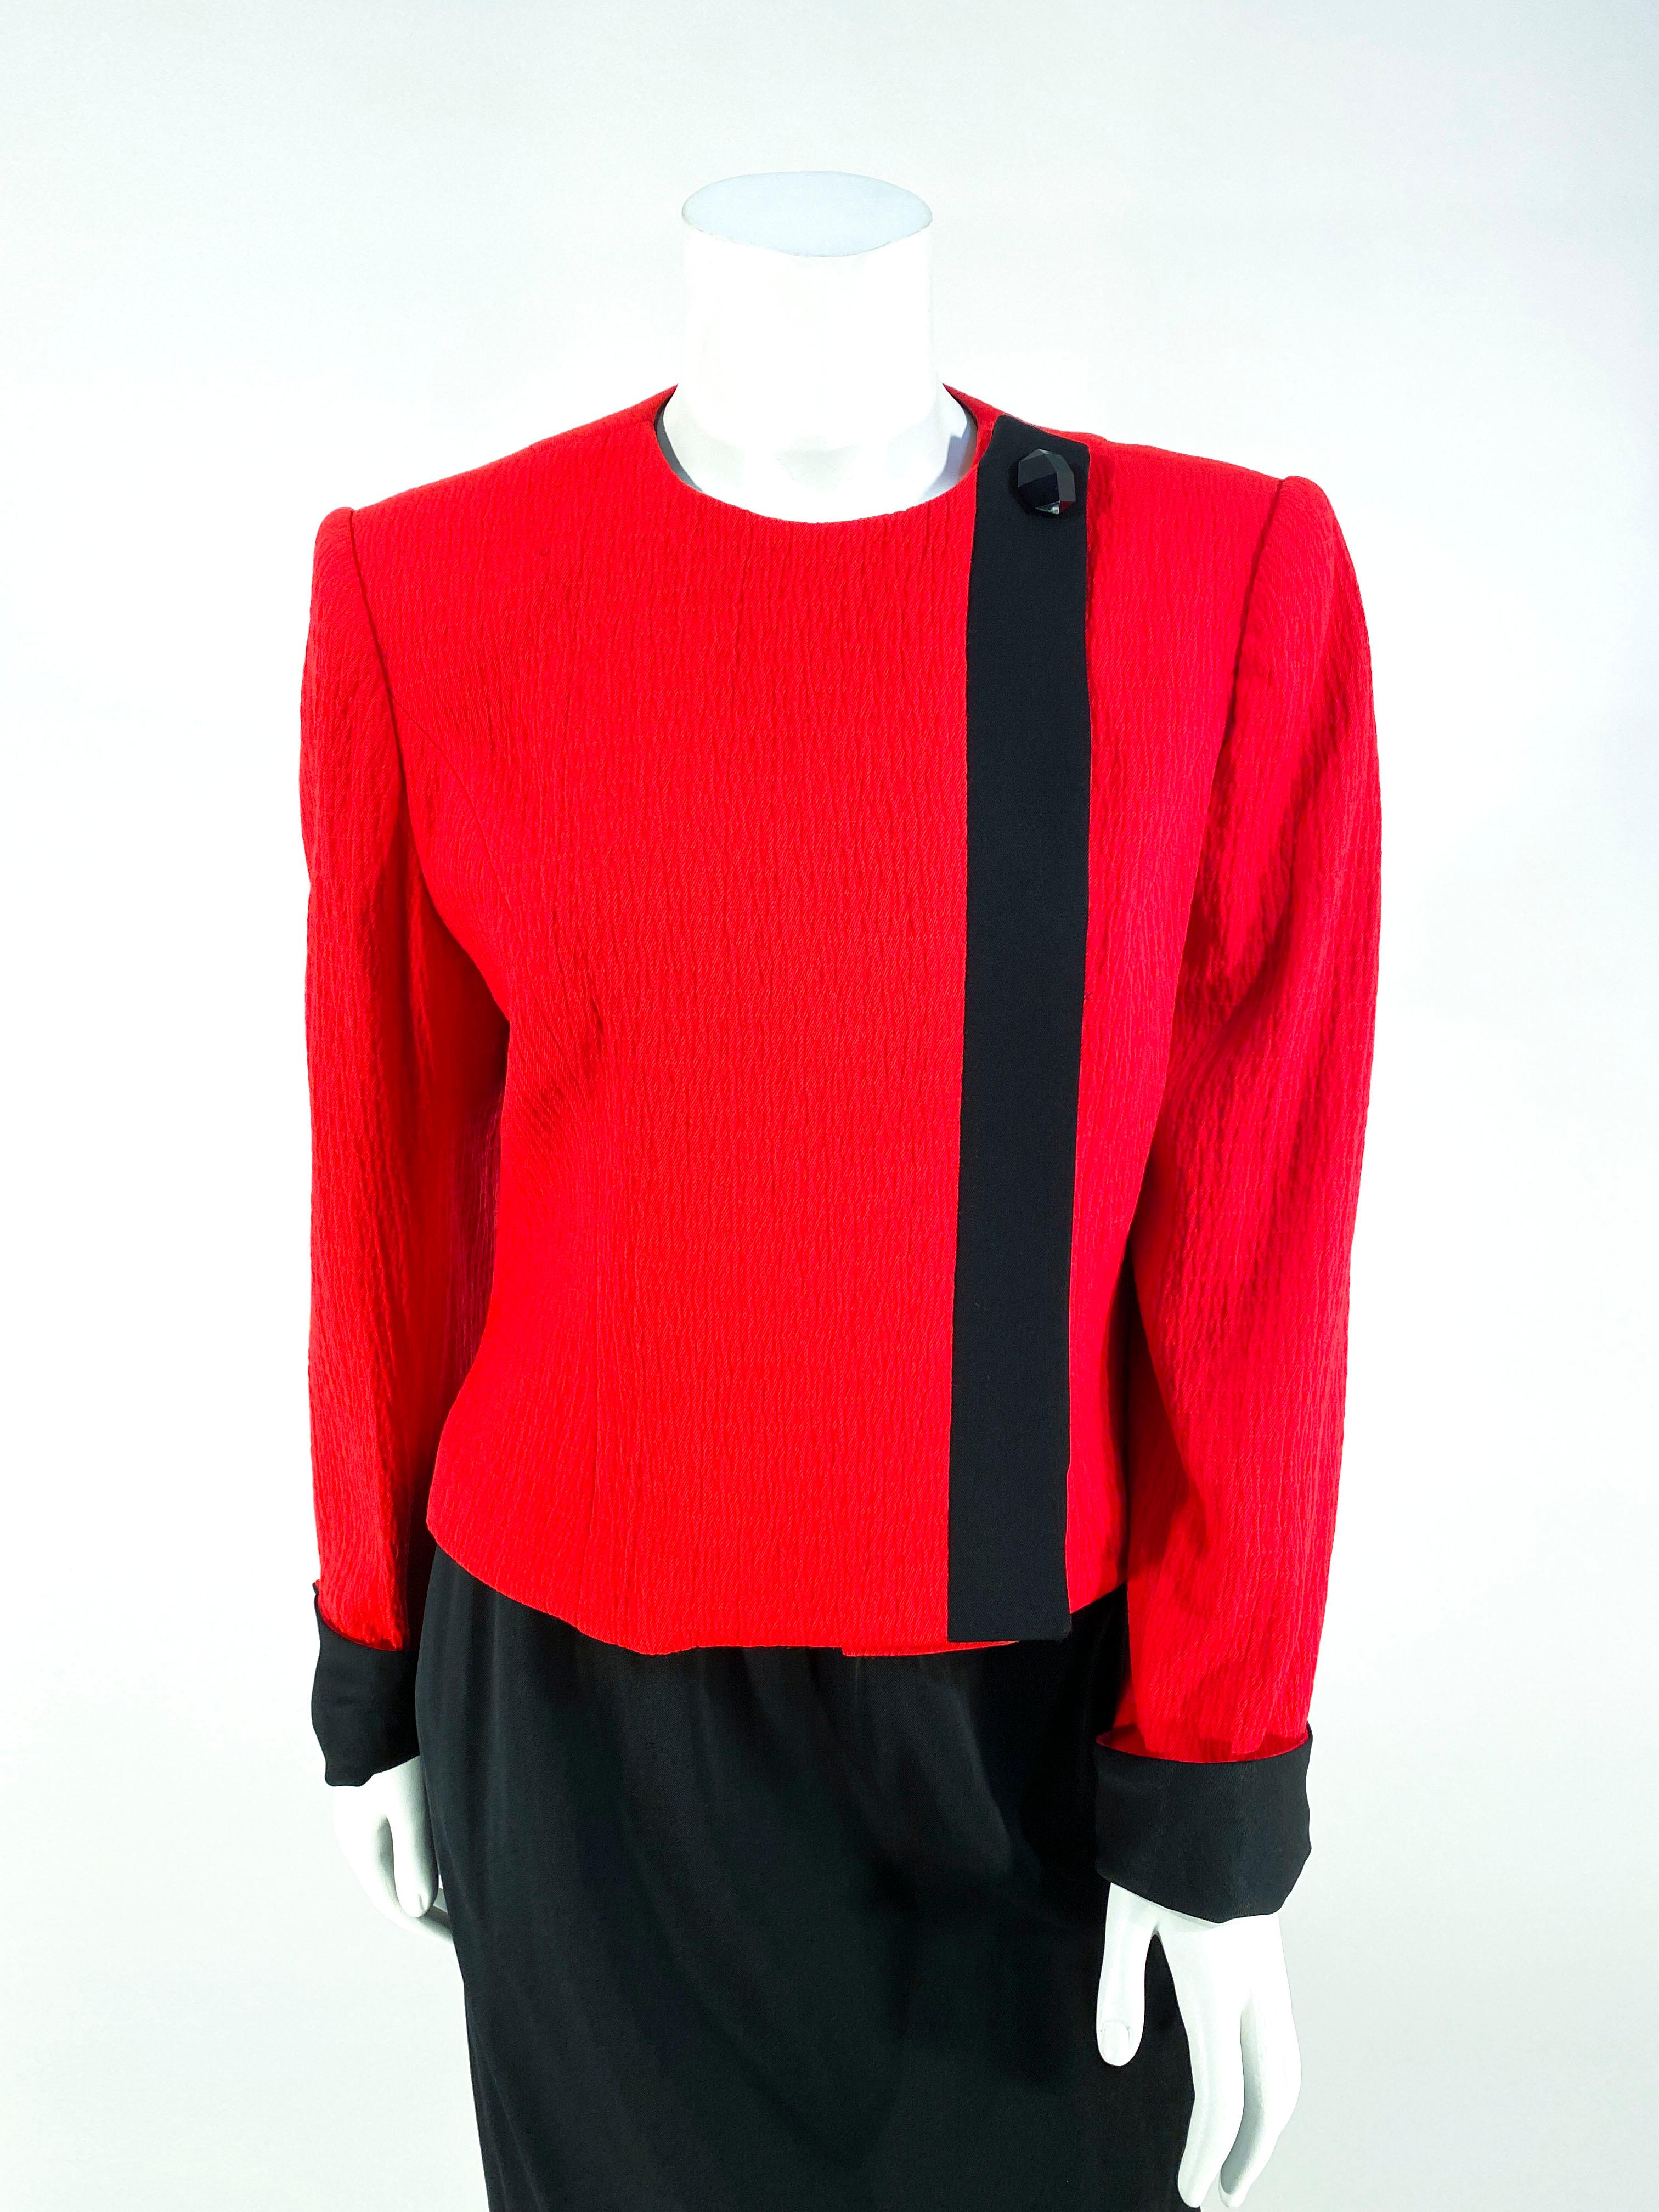 1980s David Hayes Red and black asymmetrical suit with front hidden front button closure, along a black boarder and decorative button at the neckline. The cuffs are rolled up with the matching black twill. The straight skirt is black with an applied